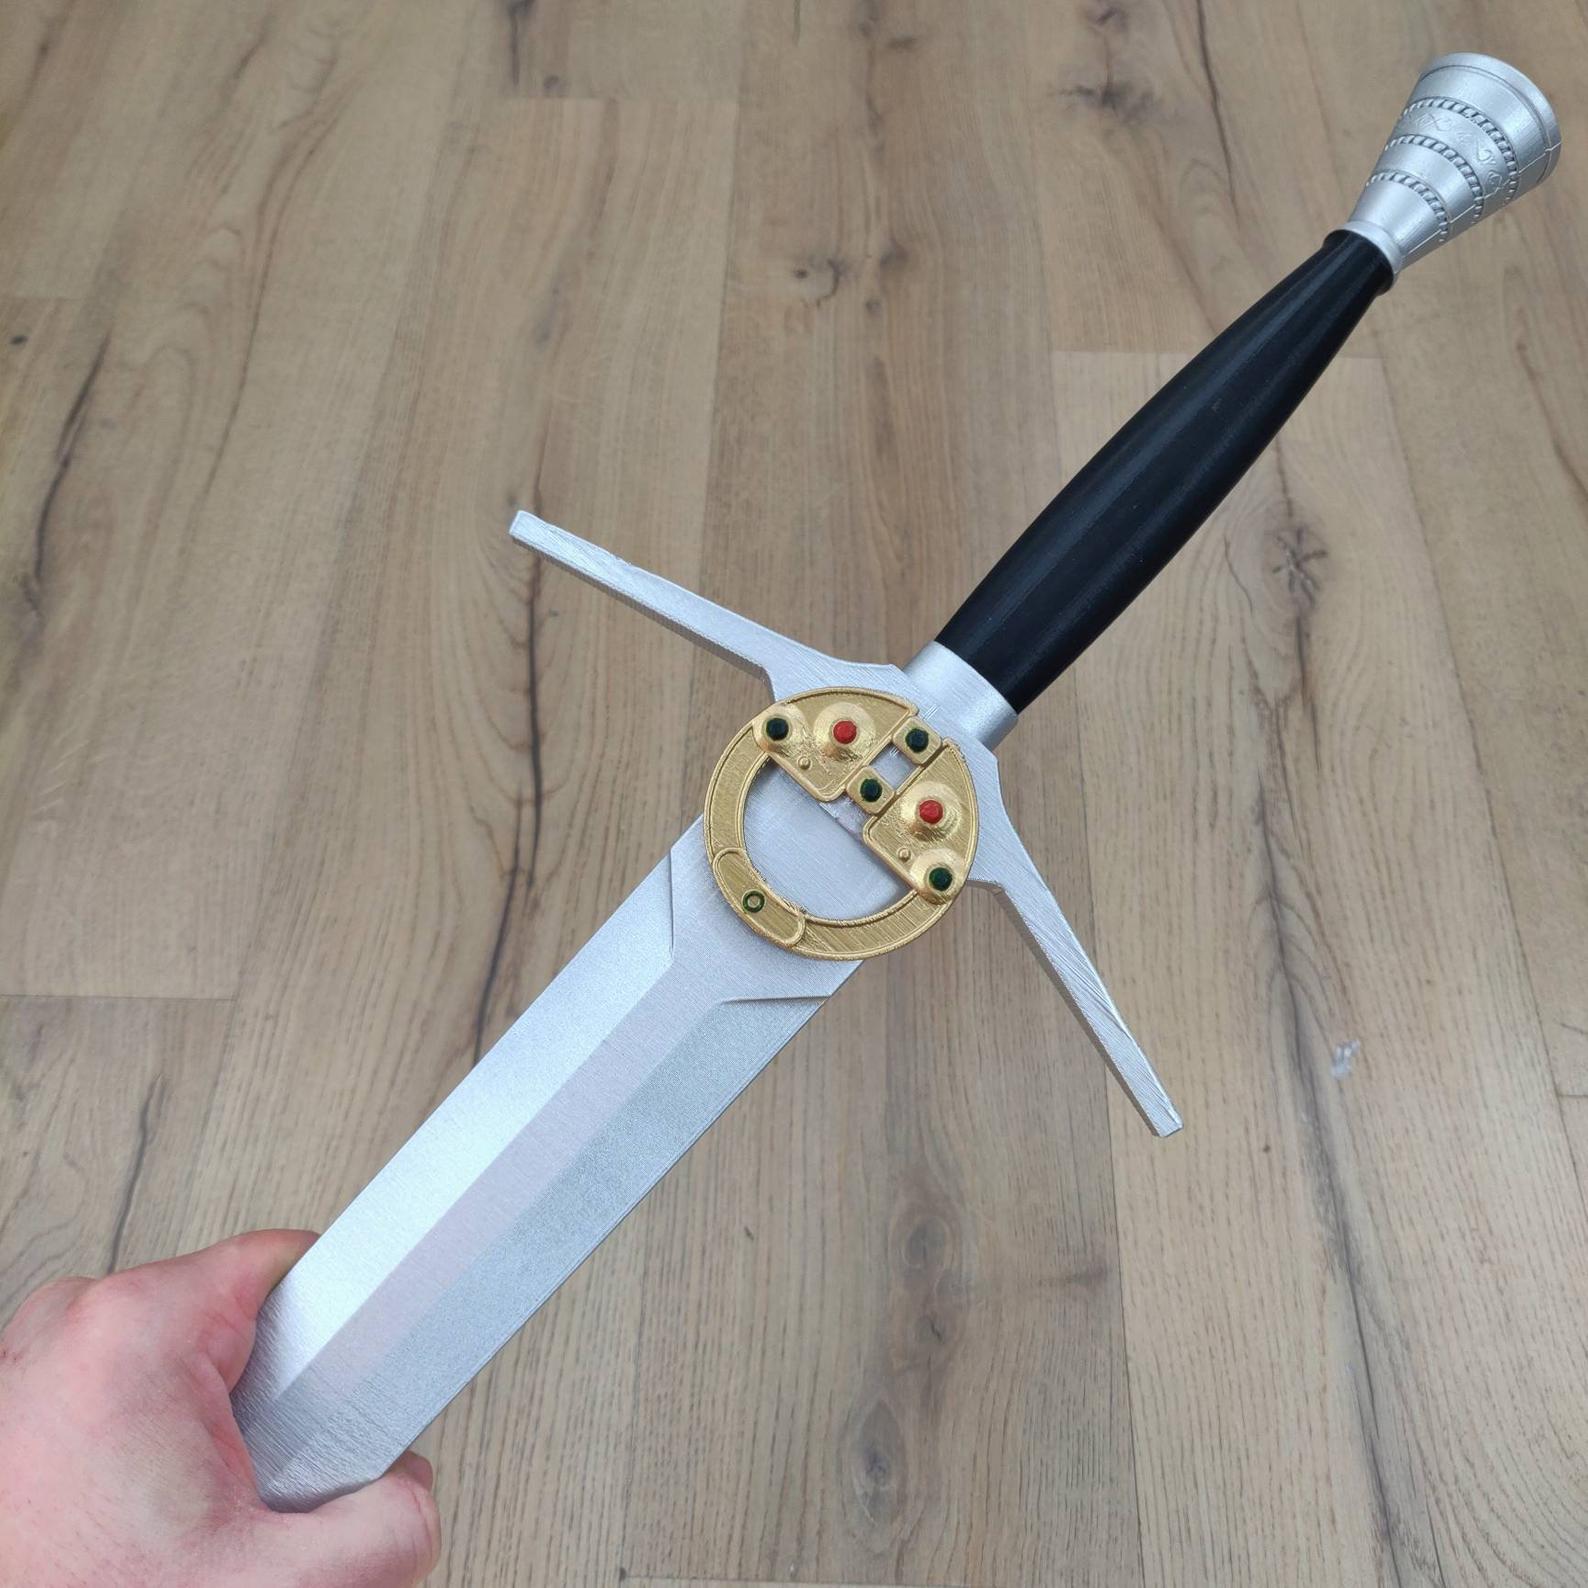 The Witcher - The Sword of Geralt Rivia, Netlifx Series, 3d printed, cosplay prop